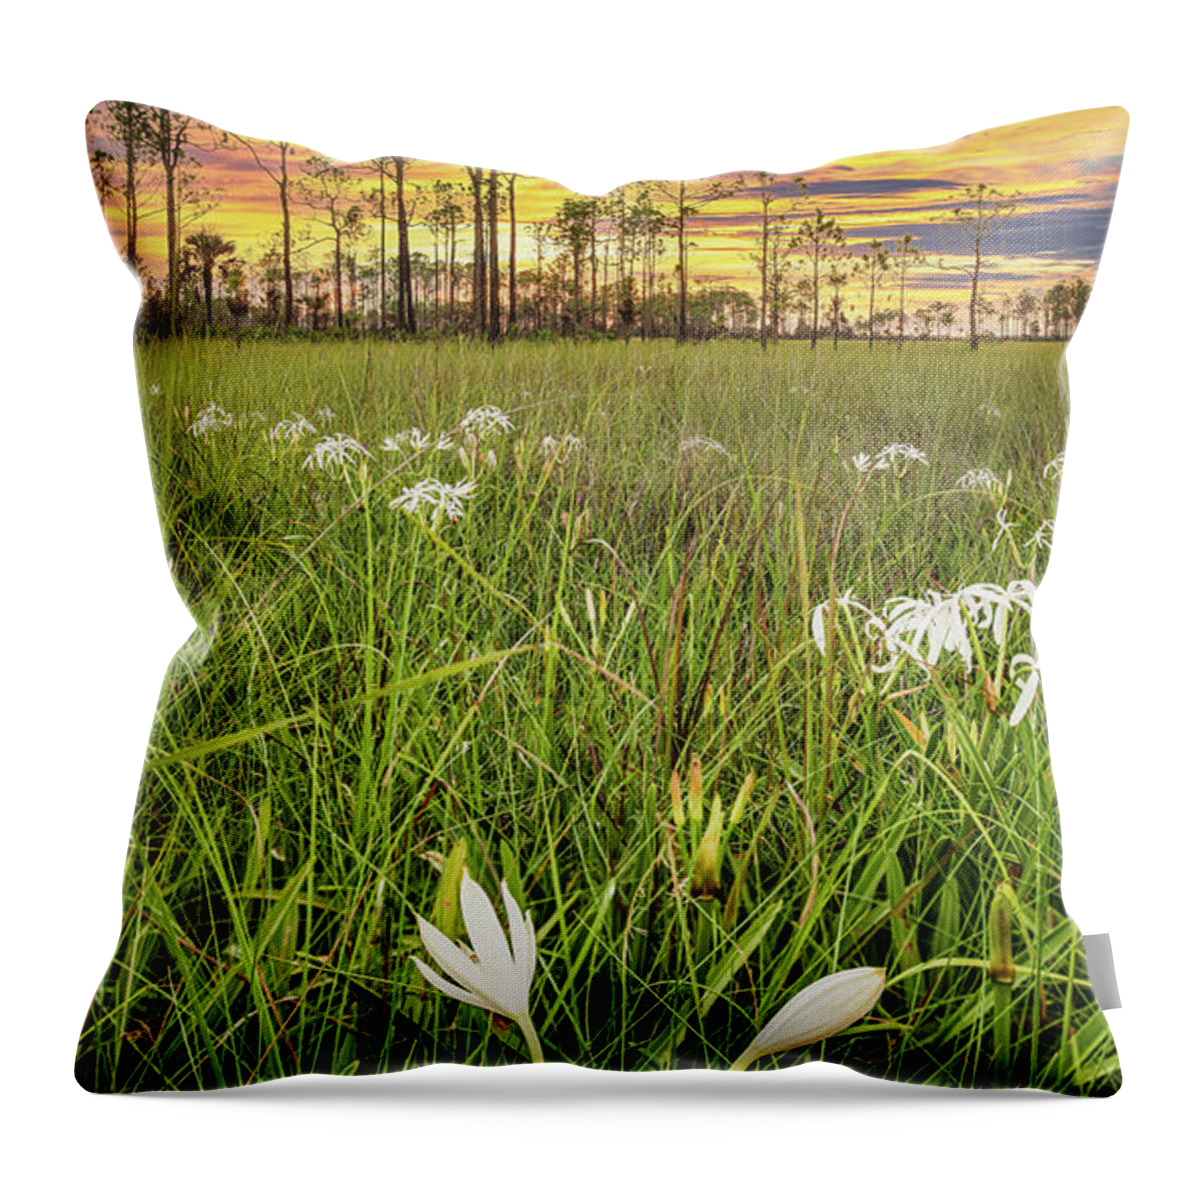 Big Cypress National Preserve Throw Pillow featuring the photograph Big Cypress Swamp Lily by Rudy Wilms